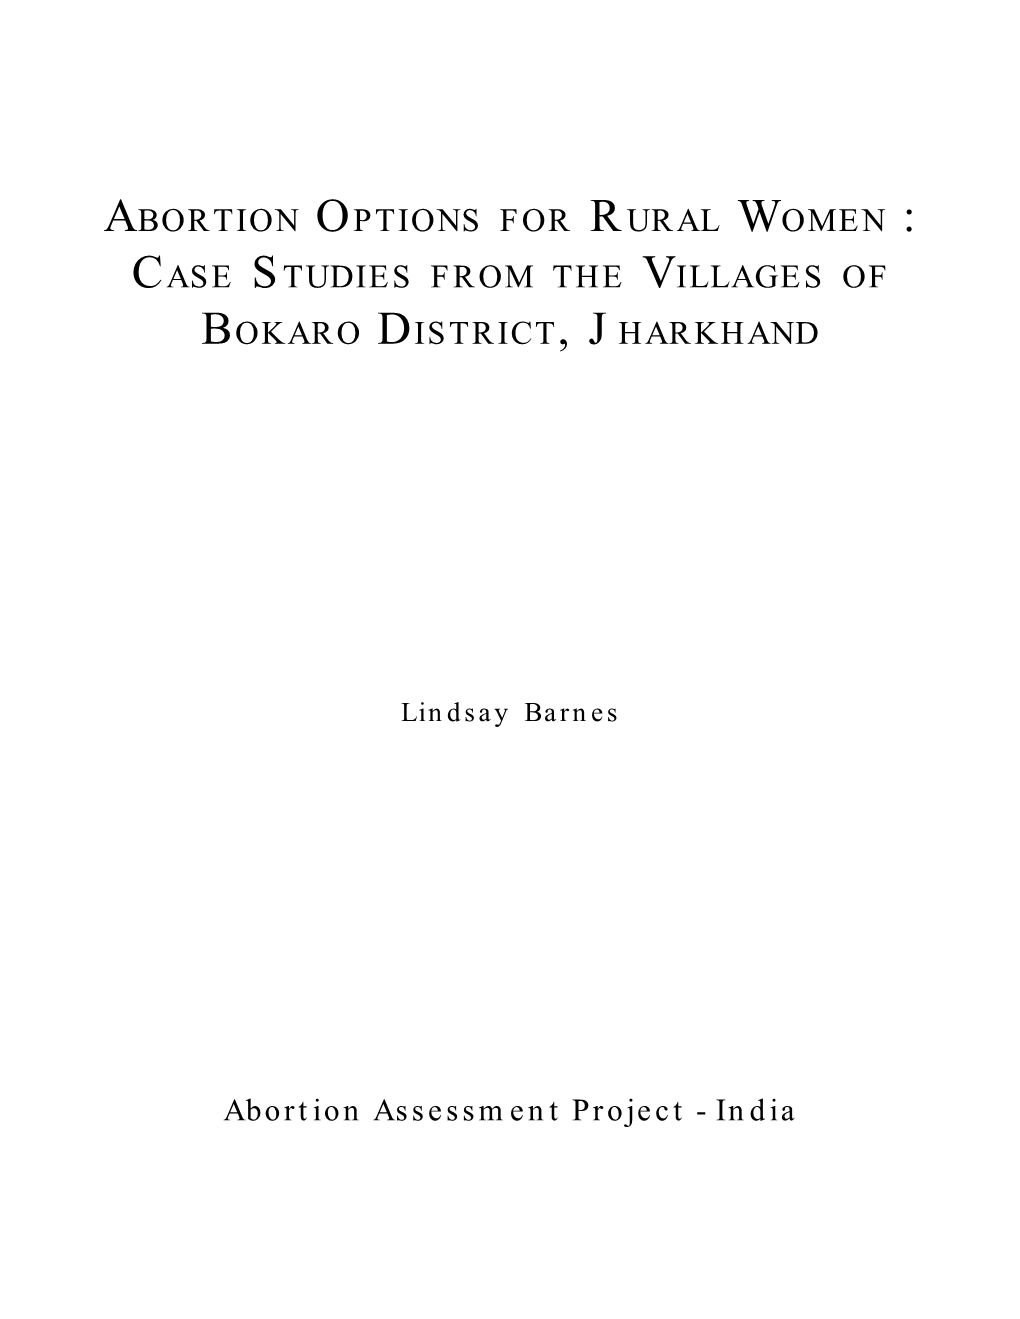 Case Studies from the Villages of Bokaro District, Jharkhand